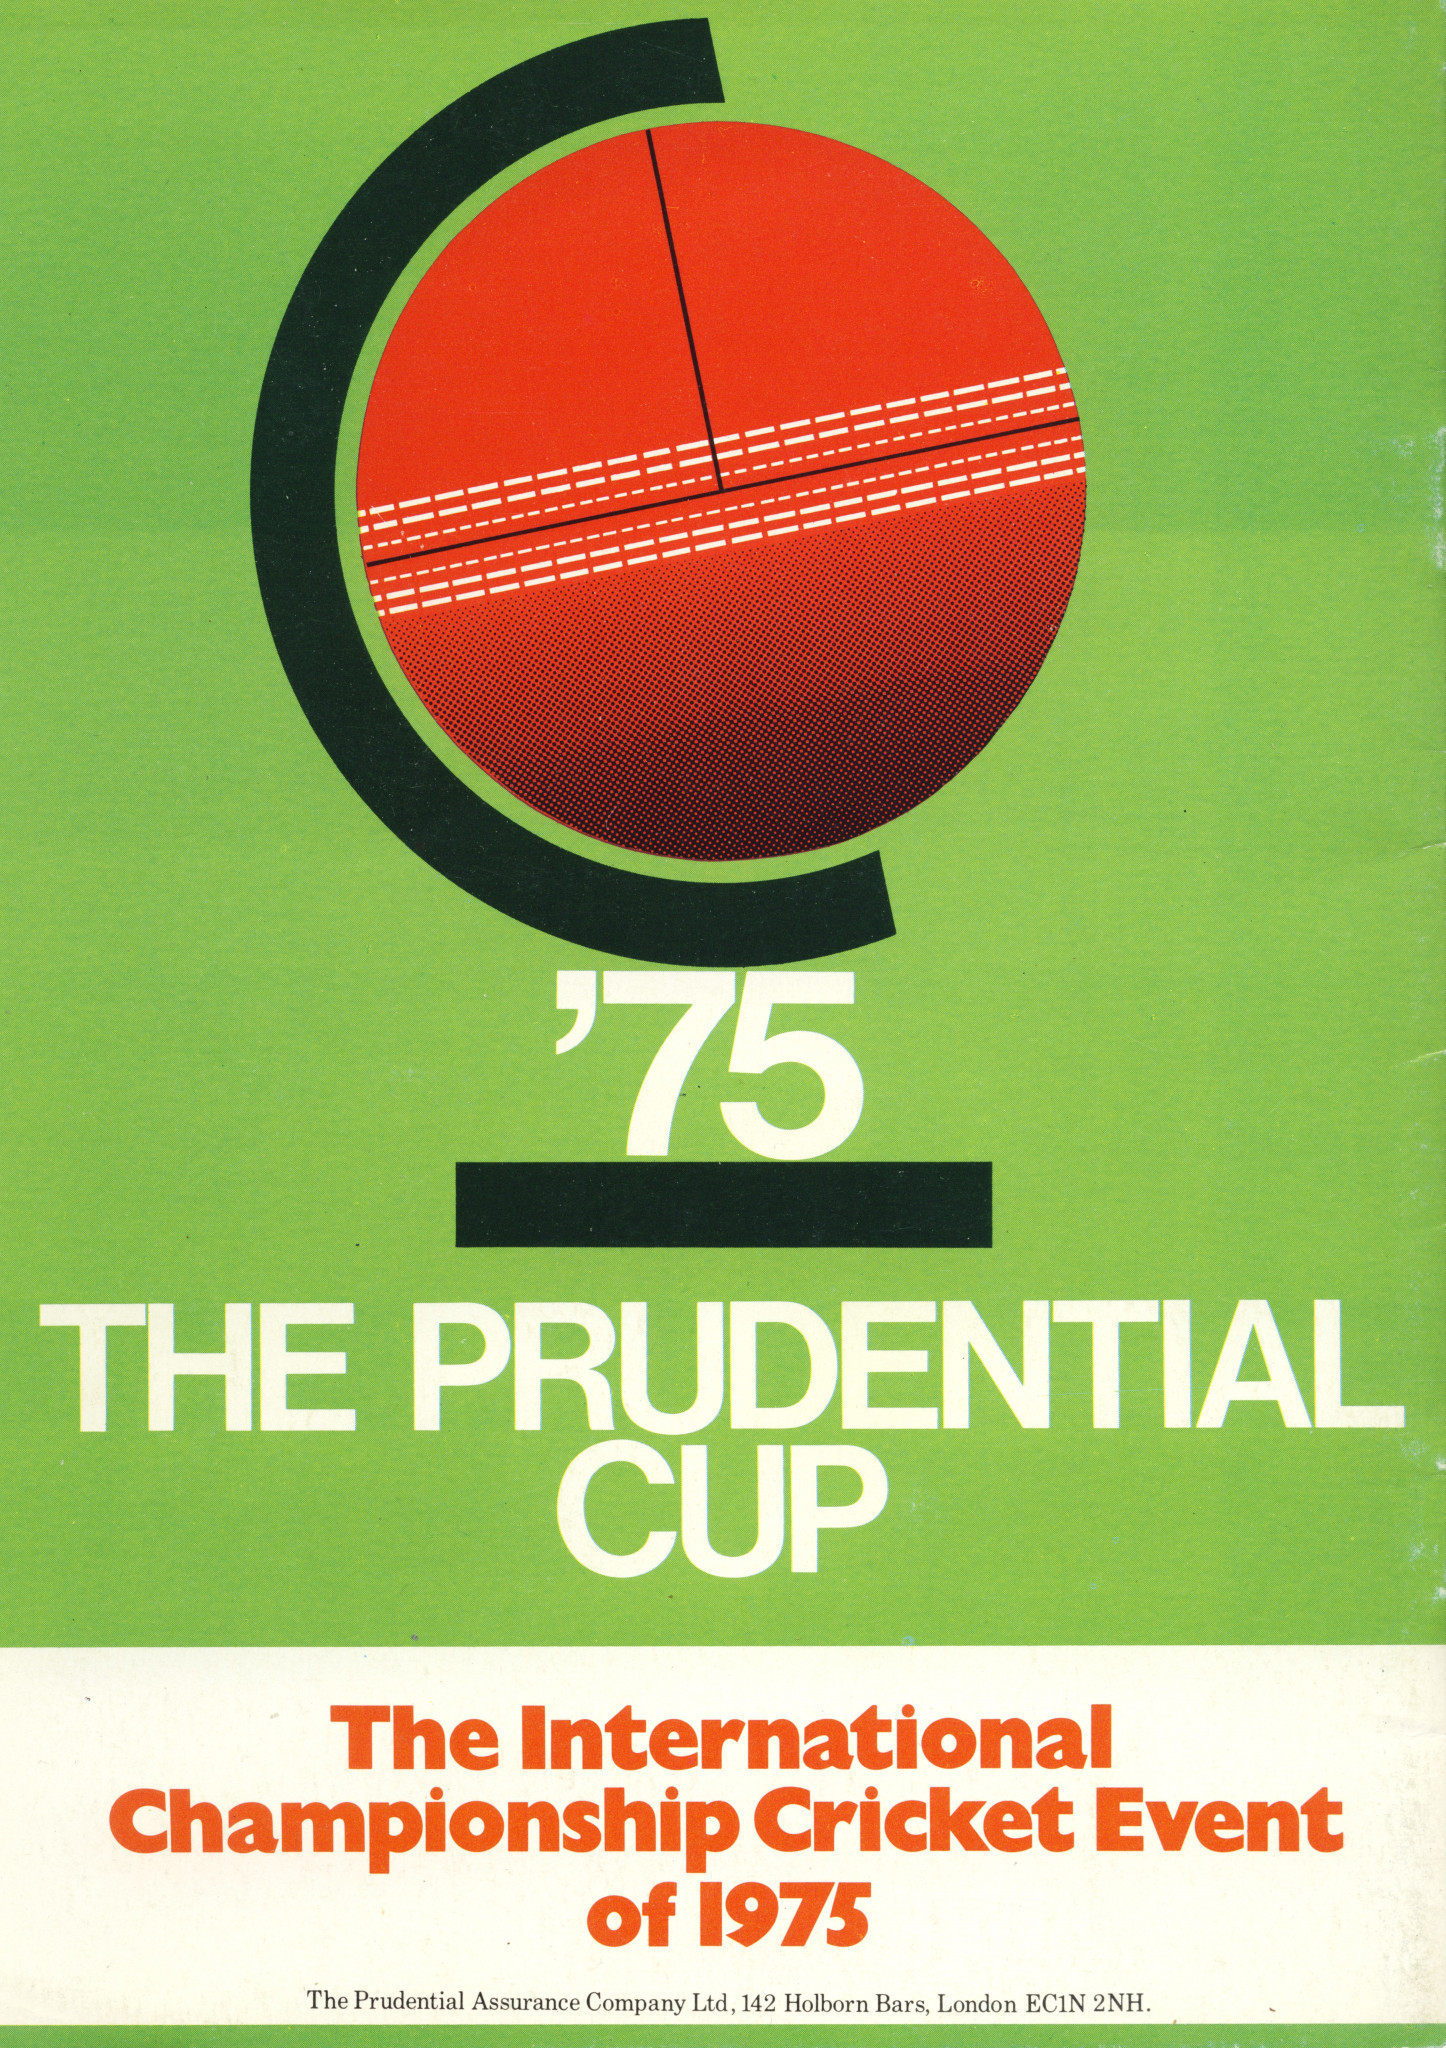 The first three men's cricket World Cups were all sponsored by Prudential Assurance ©Prudential Assurance